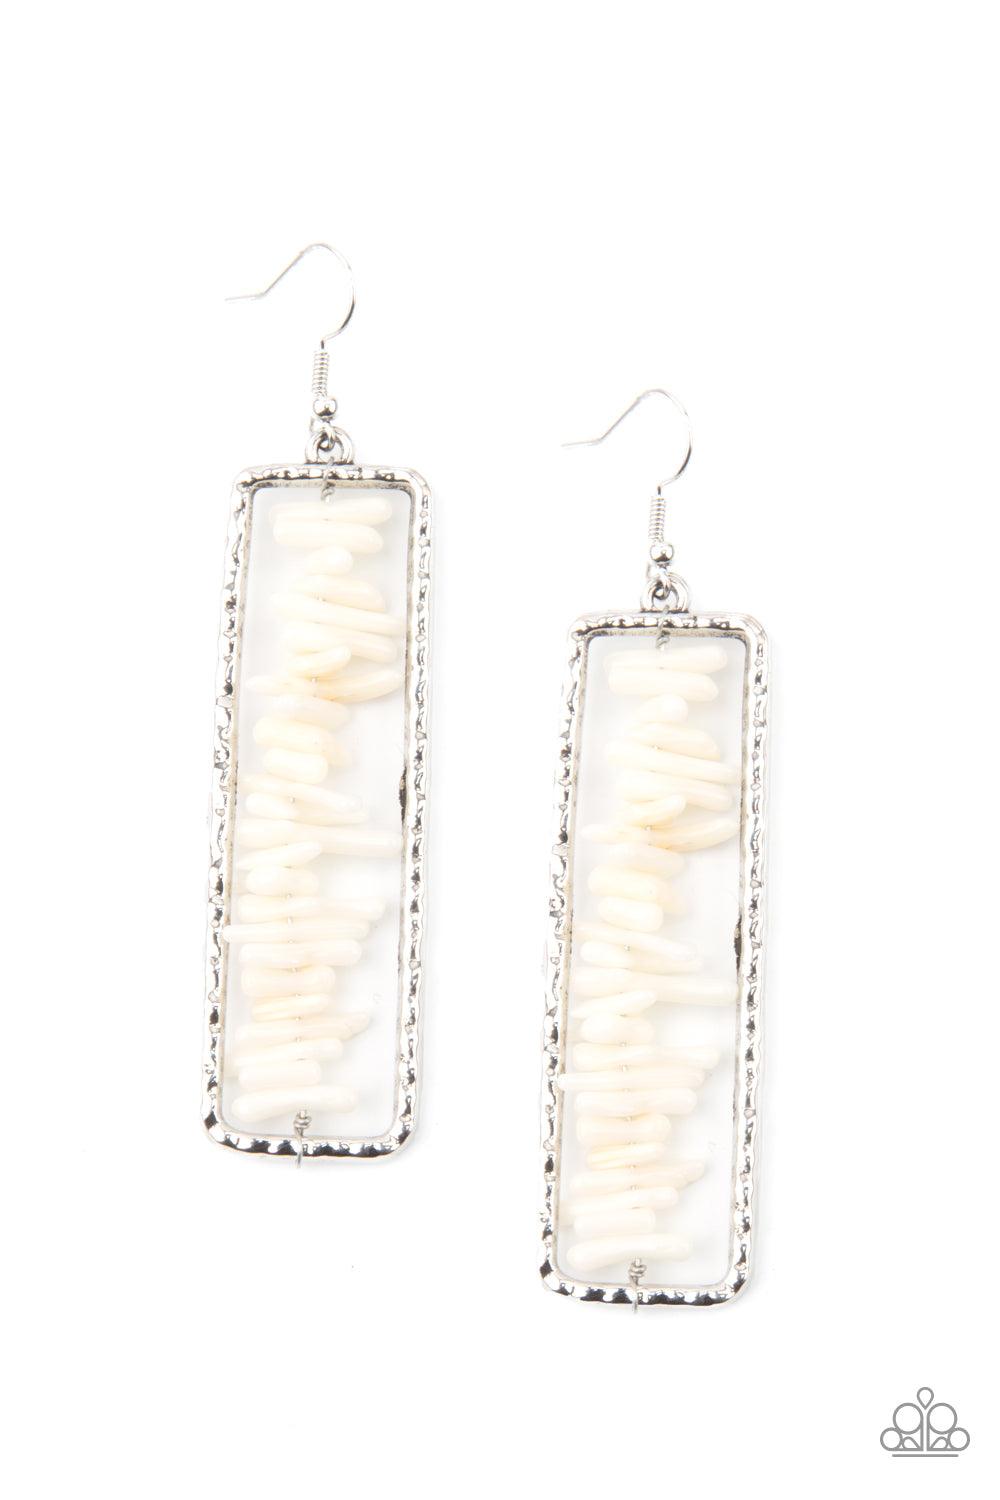 Paparazzi Accessories Dont QUARRY, Be Happy - White Bits of white rock are threaded along a metal rod inside a hammered silver rectangle, creating an earthy frame. Earring attaches to a standard fishhook fitting. Sold as one pair of earrings. Earrings